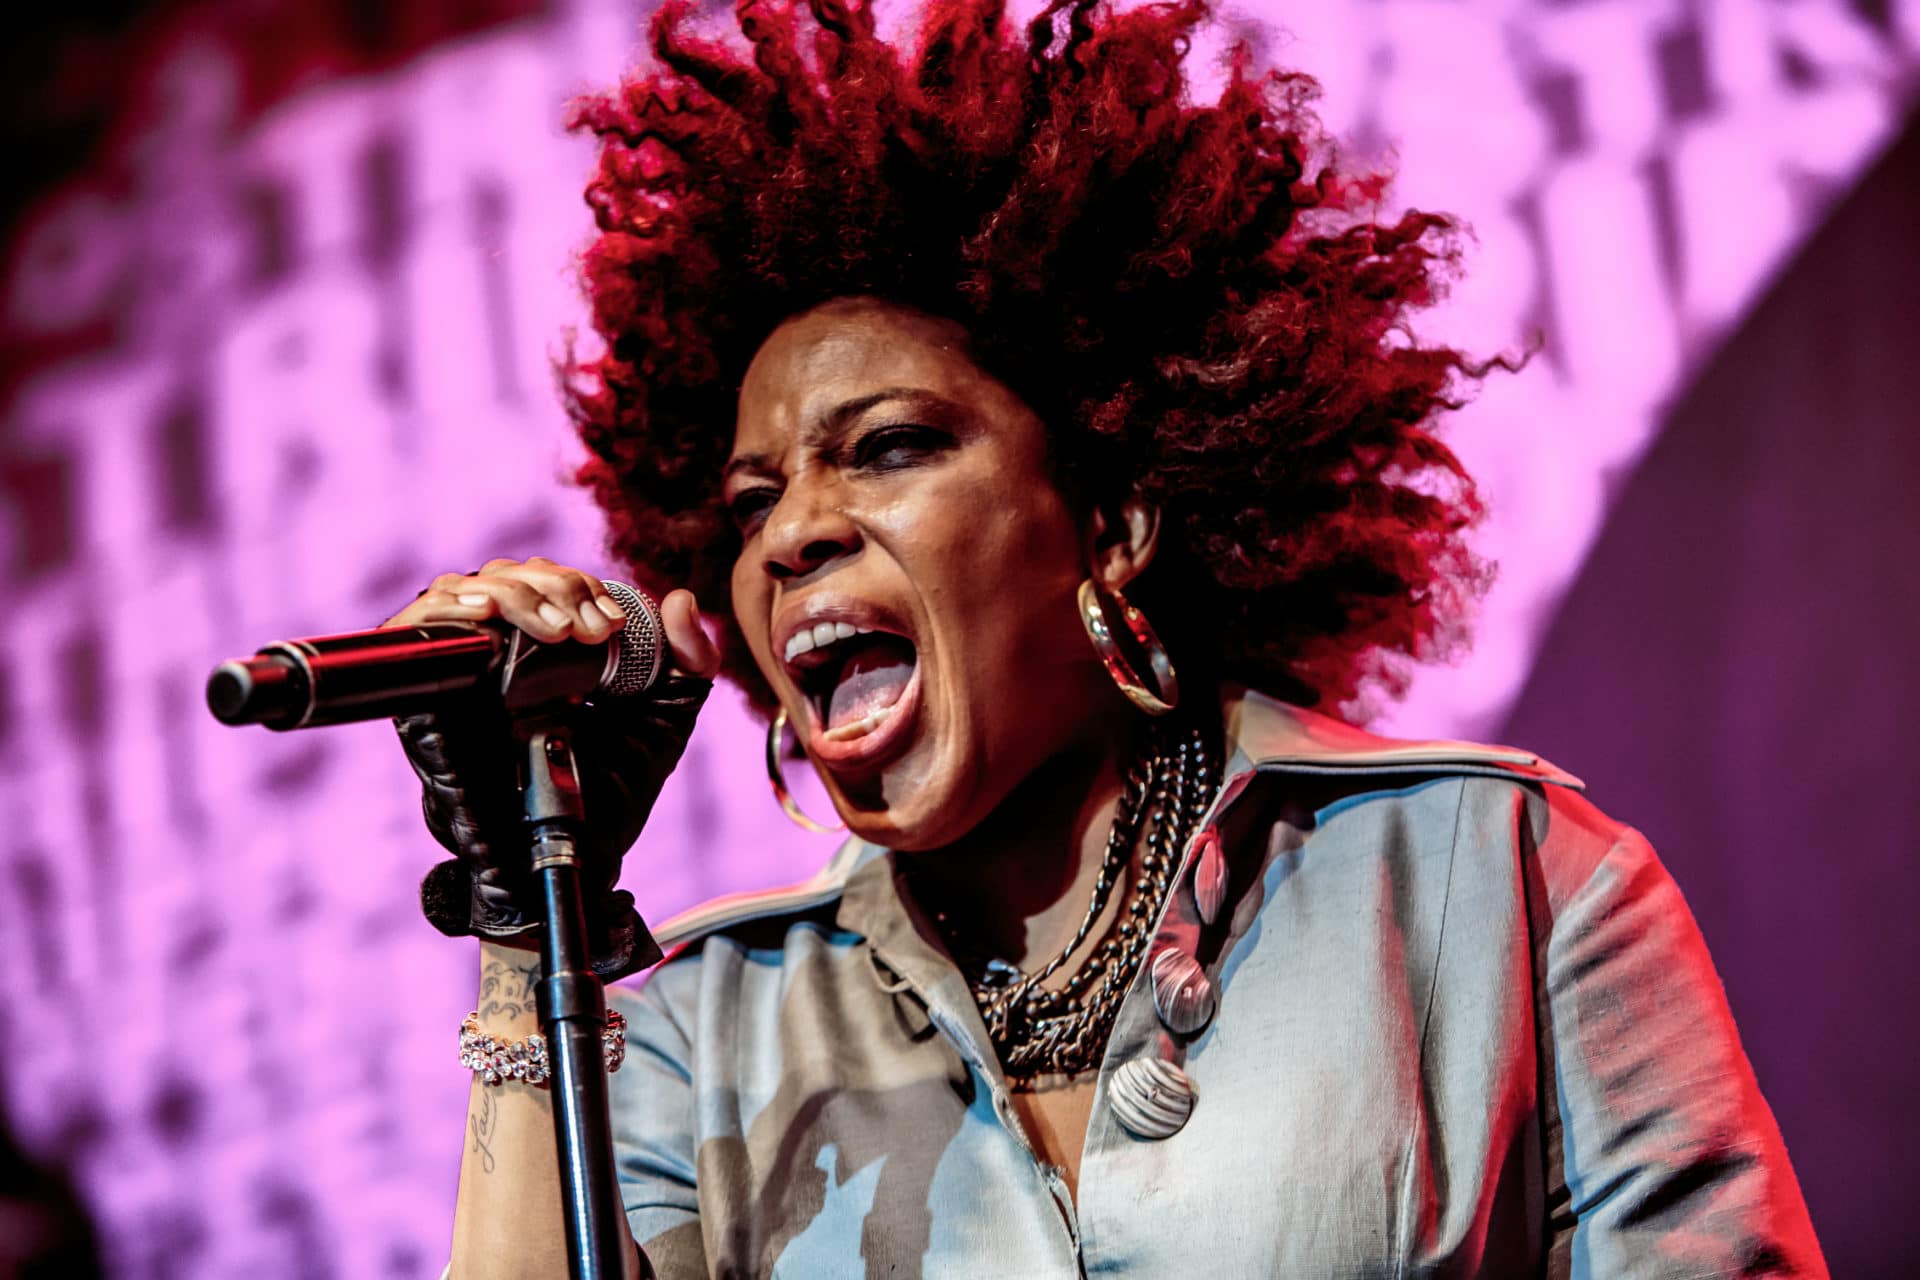 Macy Gray Says Latest Album 'Ruby' Will 'Make People Feel Better'